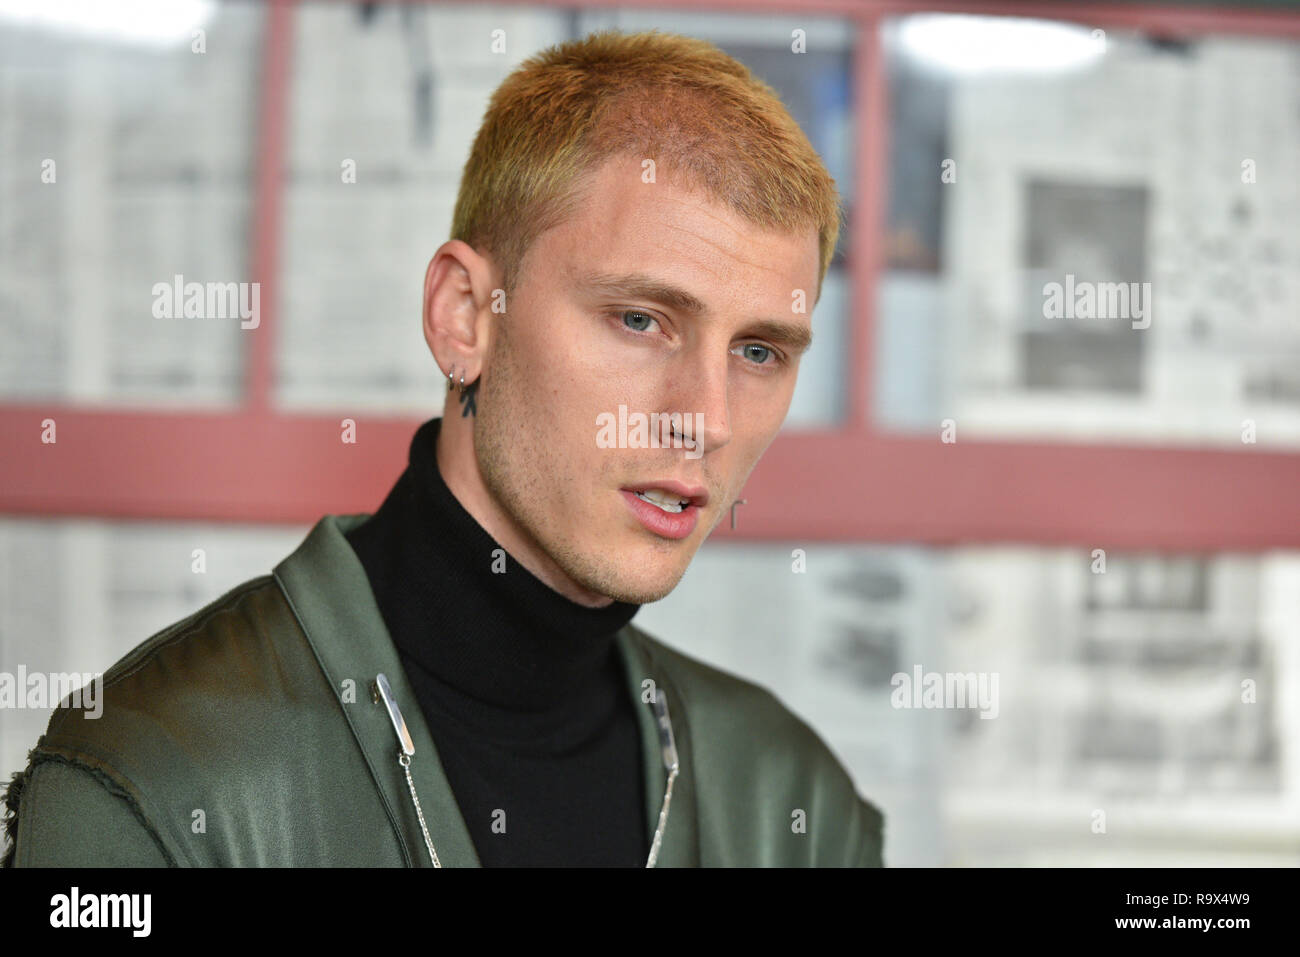 Colson Baker aka Machine Gun Kelly attends the New York screening of 'Bird Box' at Alice Tully Hall, Lincoln Center on December 17, 2018 in New York C Stock Photo